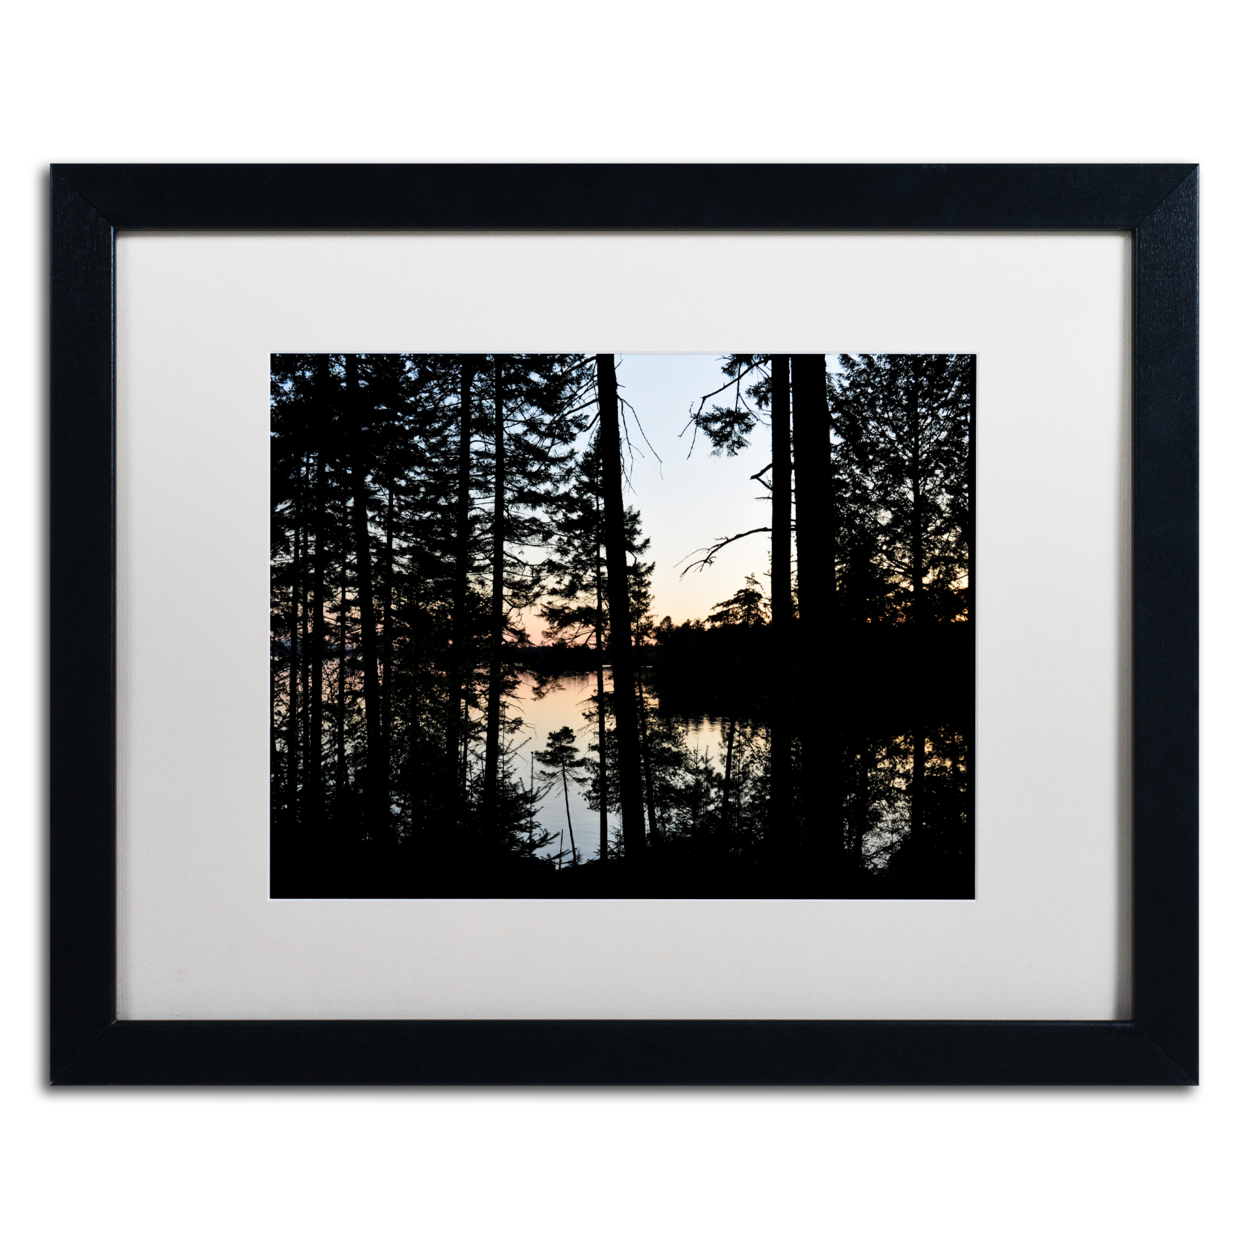 Nicole Dietz 'Sunset Through The Trees' Black Wooden Framed Art 18 X 22 Inches